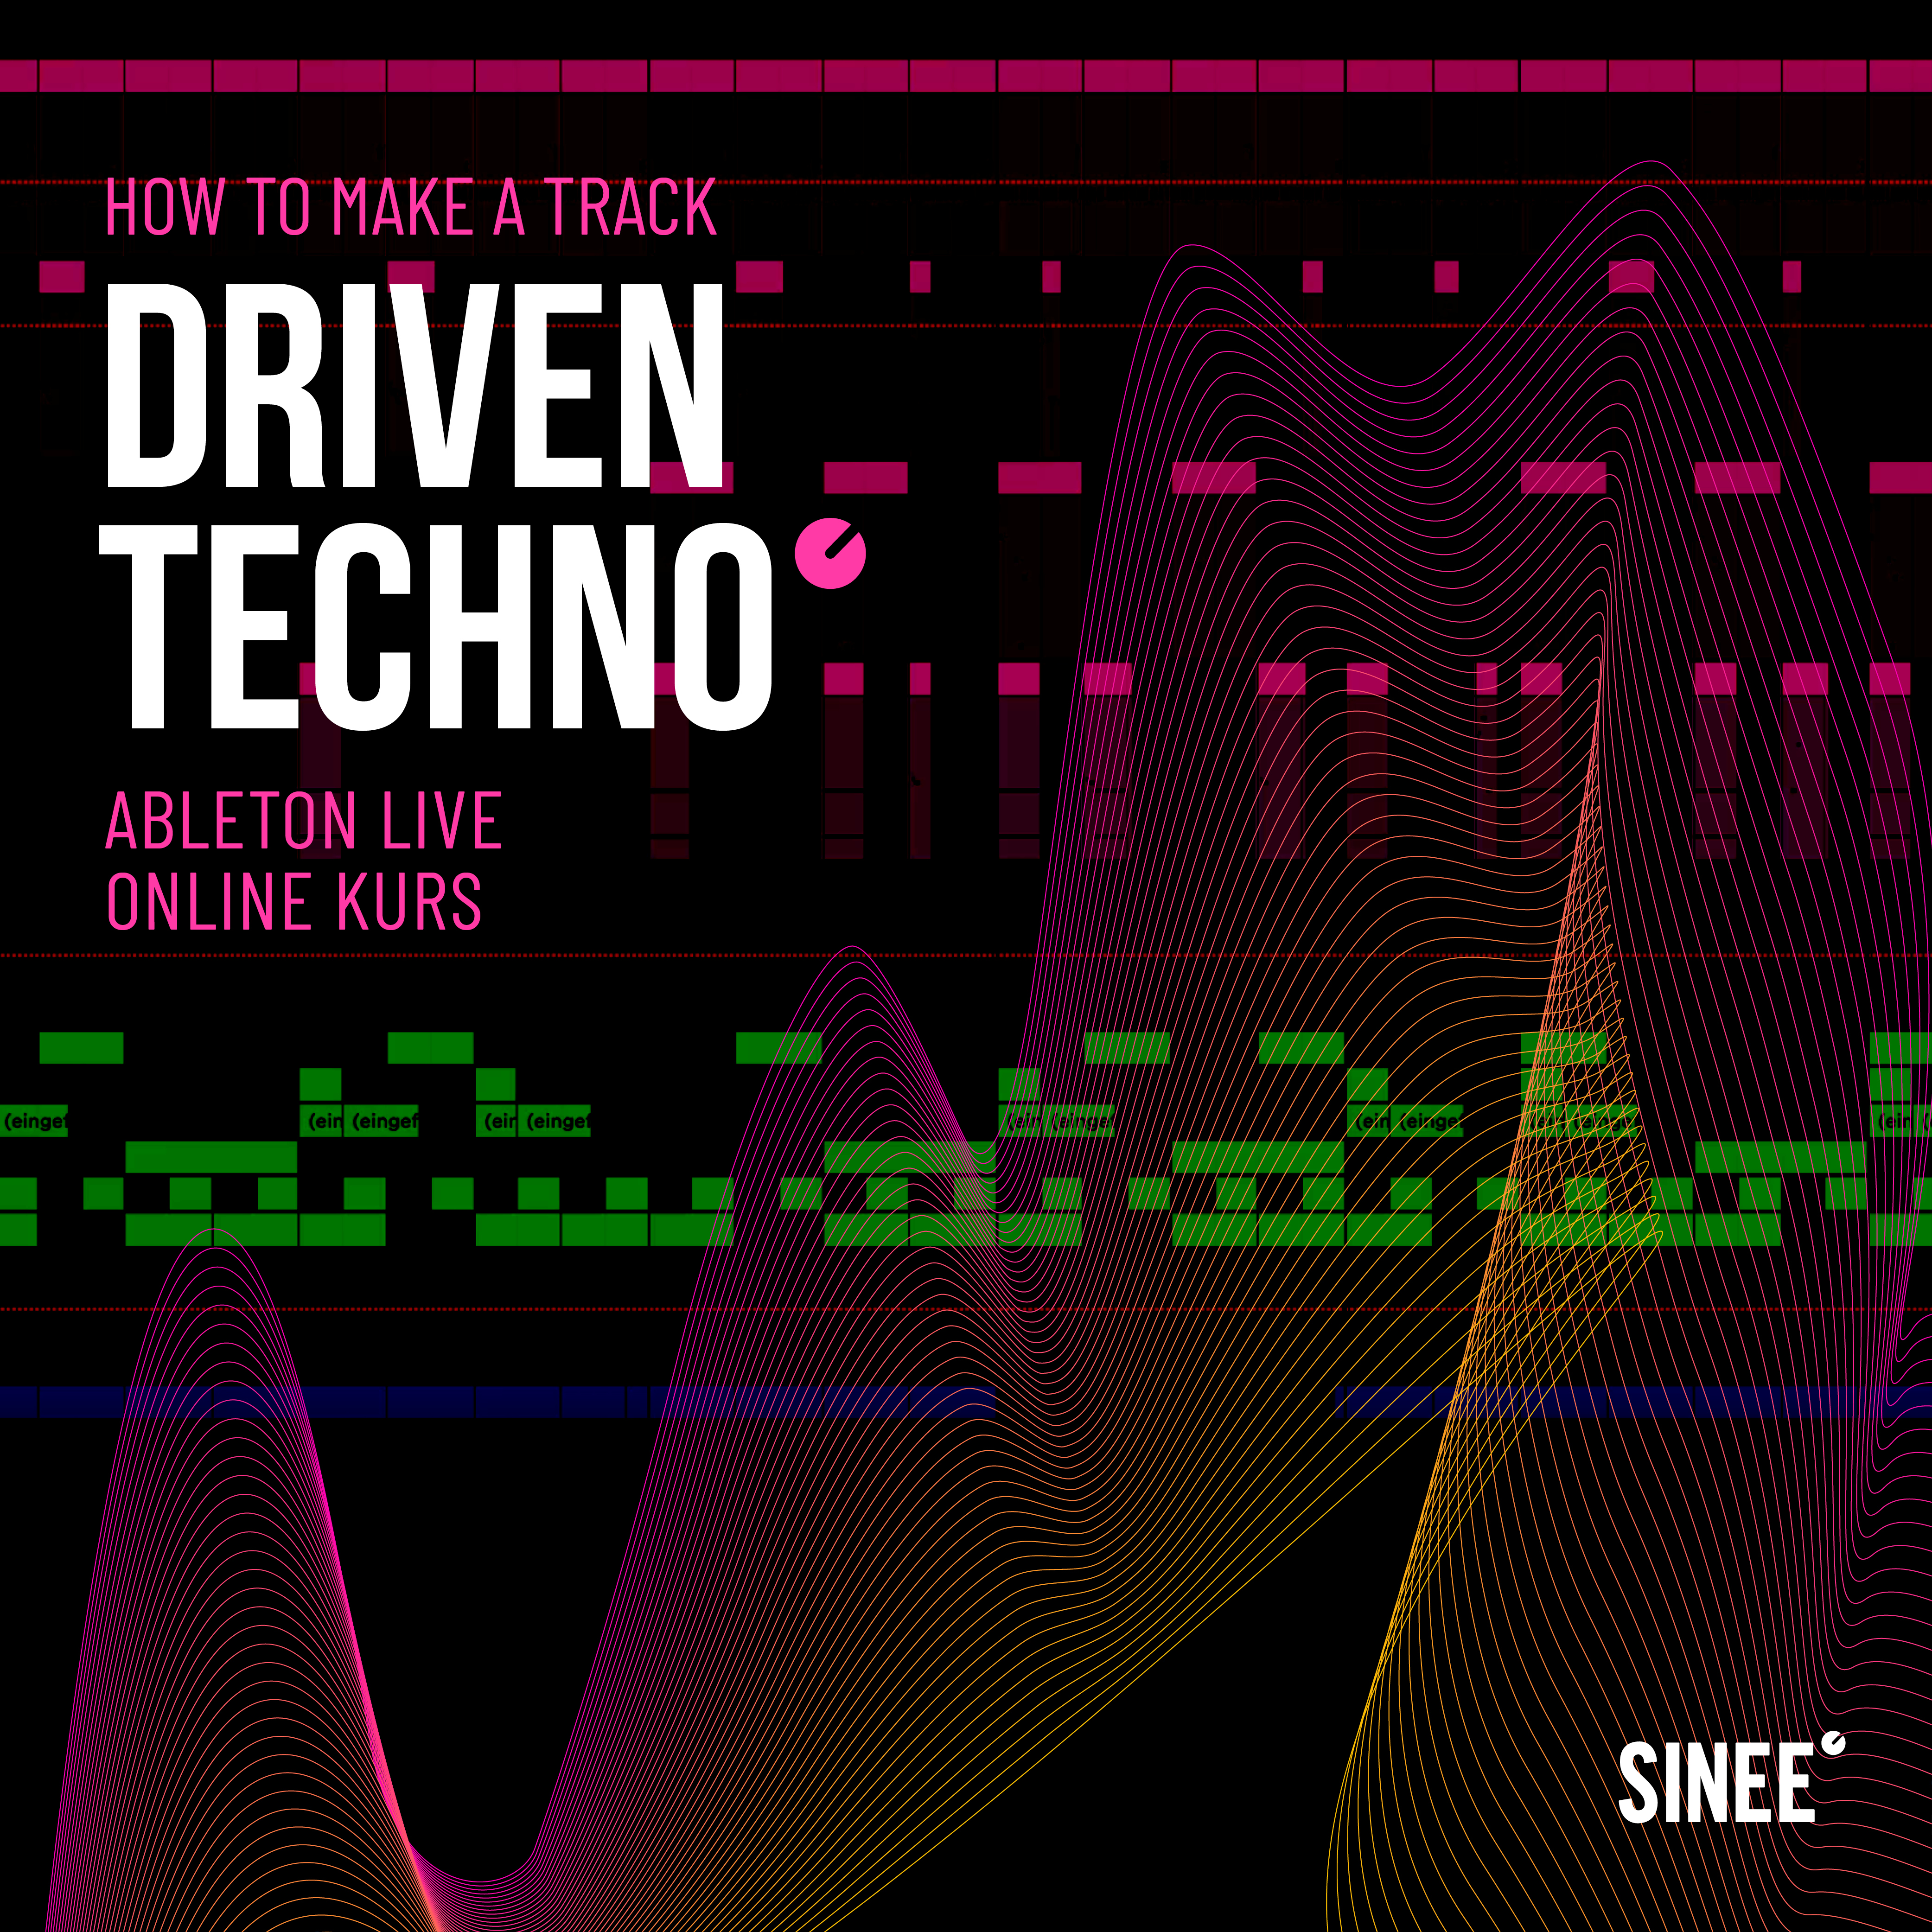 Driven Techno – How To Make A Track